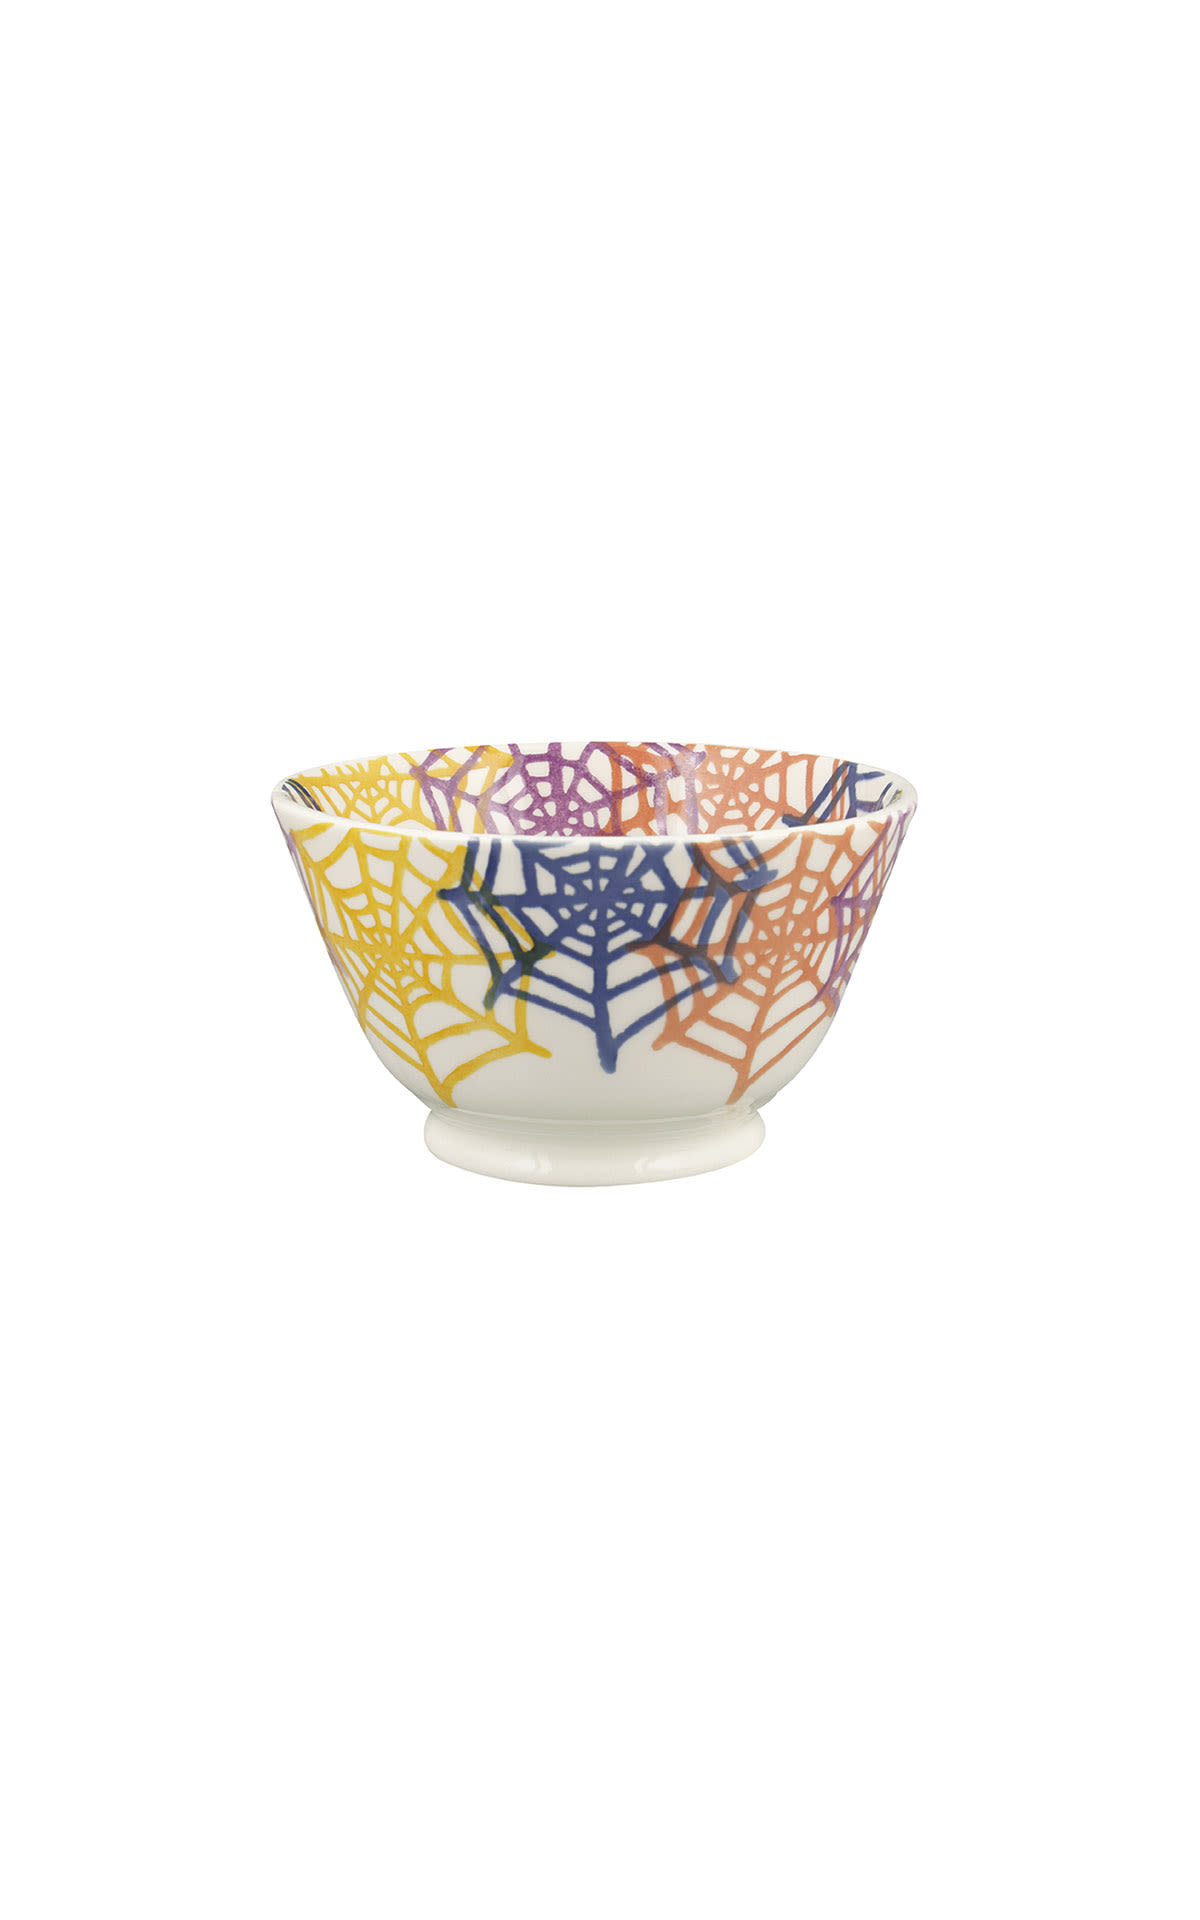 Emma Bridgewater Cobwebs small old bowl from Bicester Village